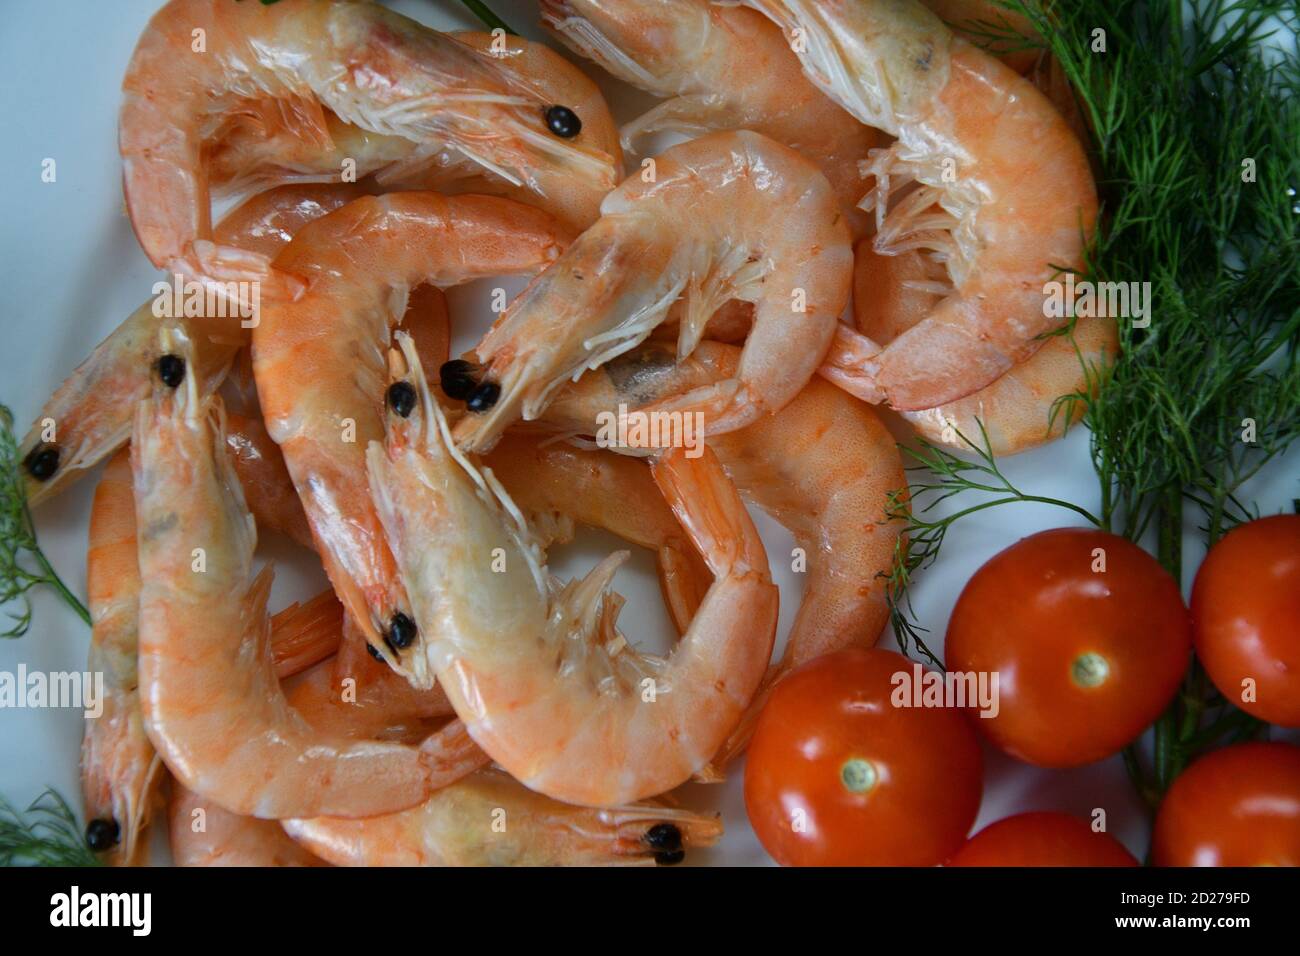 Prawns (Latin. Caridea) - recipes of culinary dishes with shrimp are popular in many countries Stock Photo